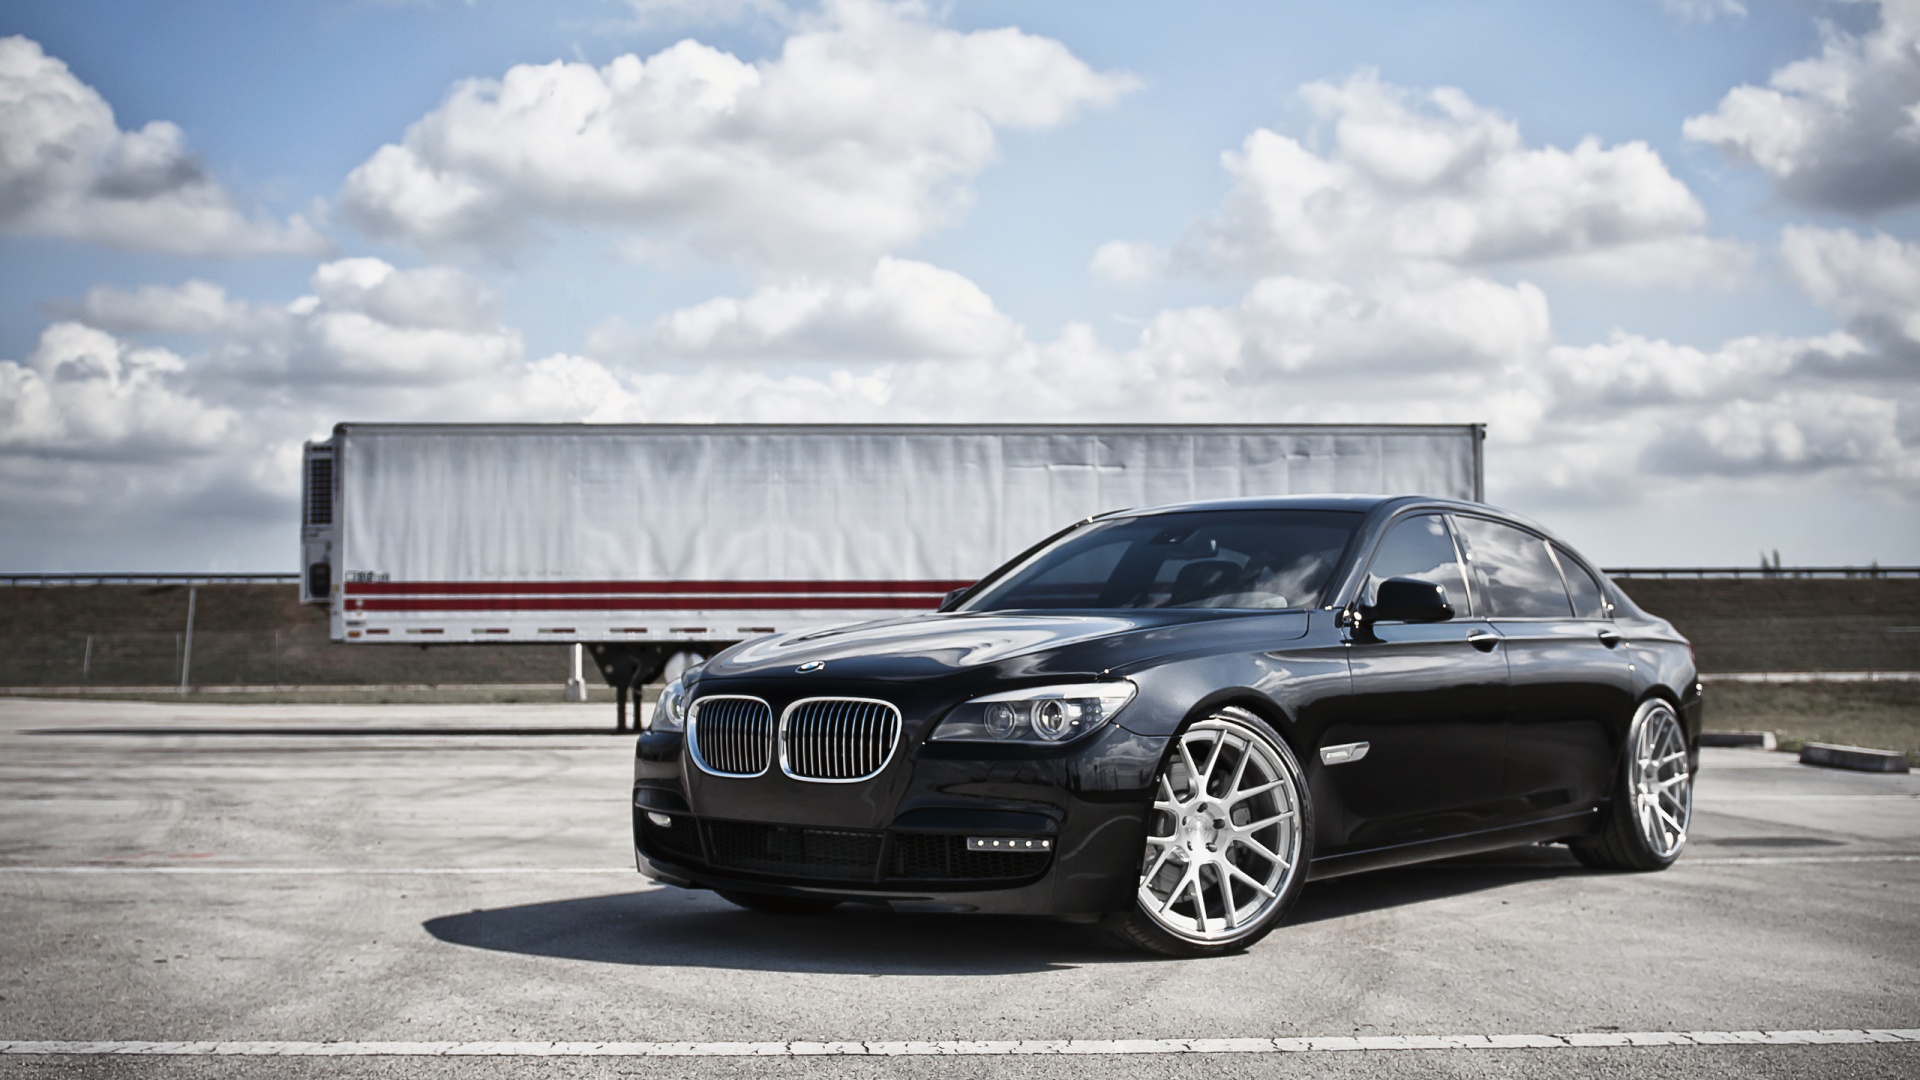 Bmw Image Series HD Wallpaper And Background Photos